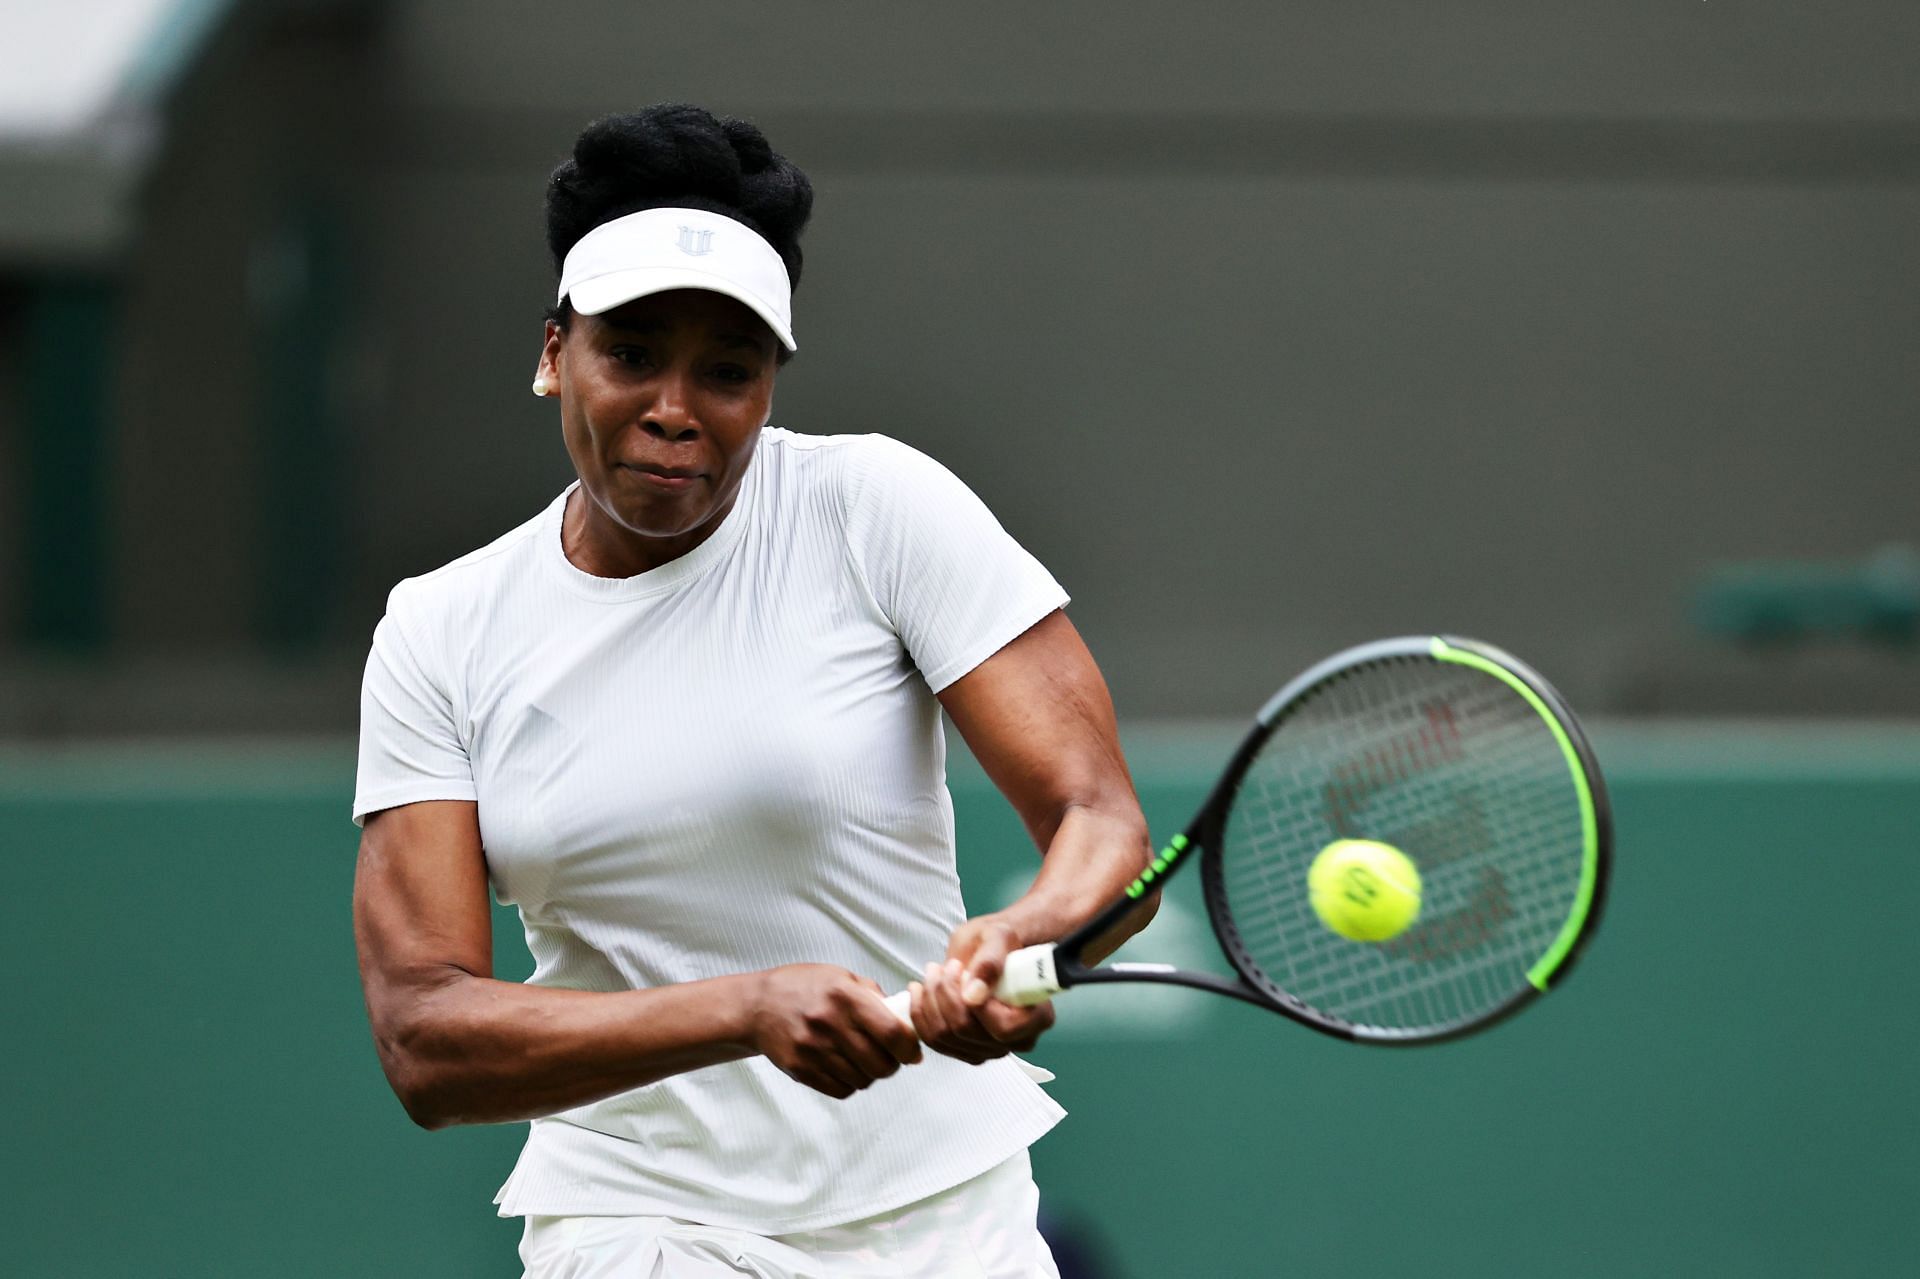 Venus Williams has said that she will return to action